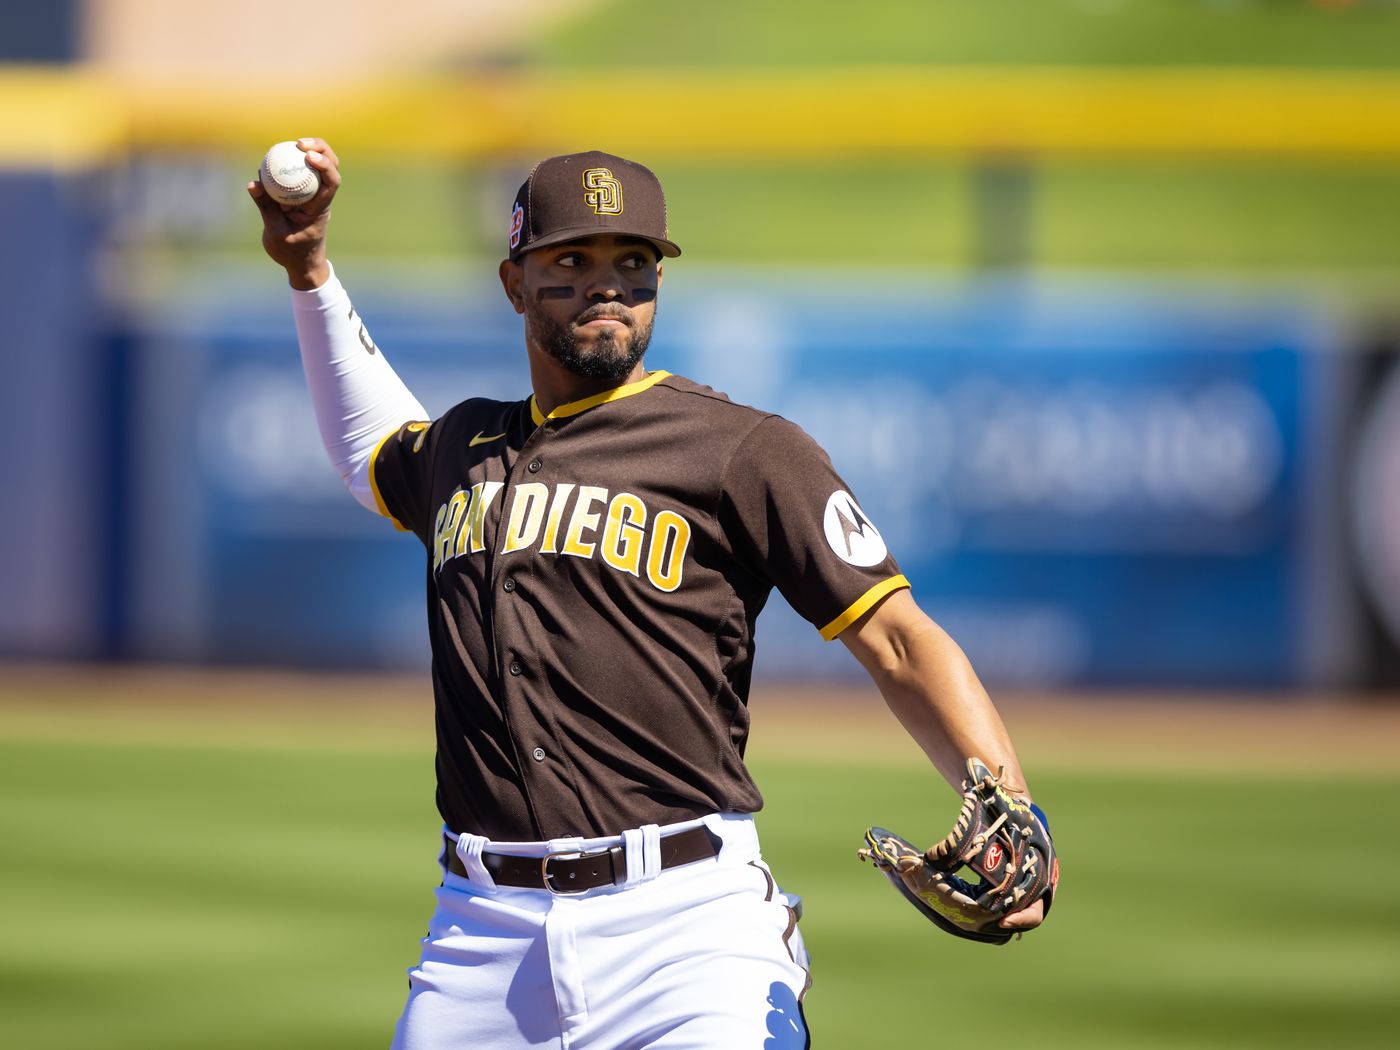 What Can We Expect From 2010 Padres?